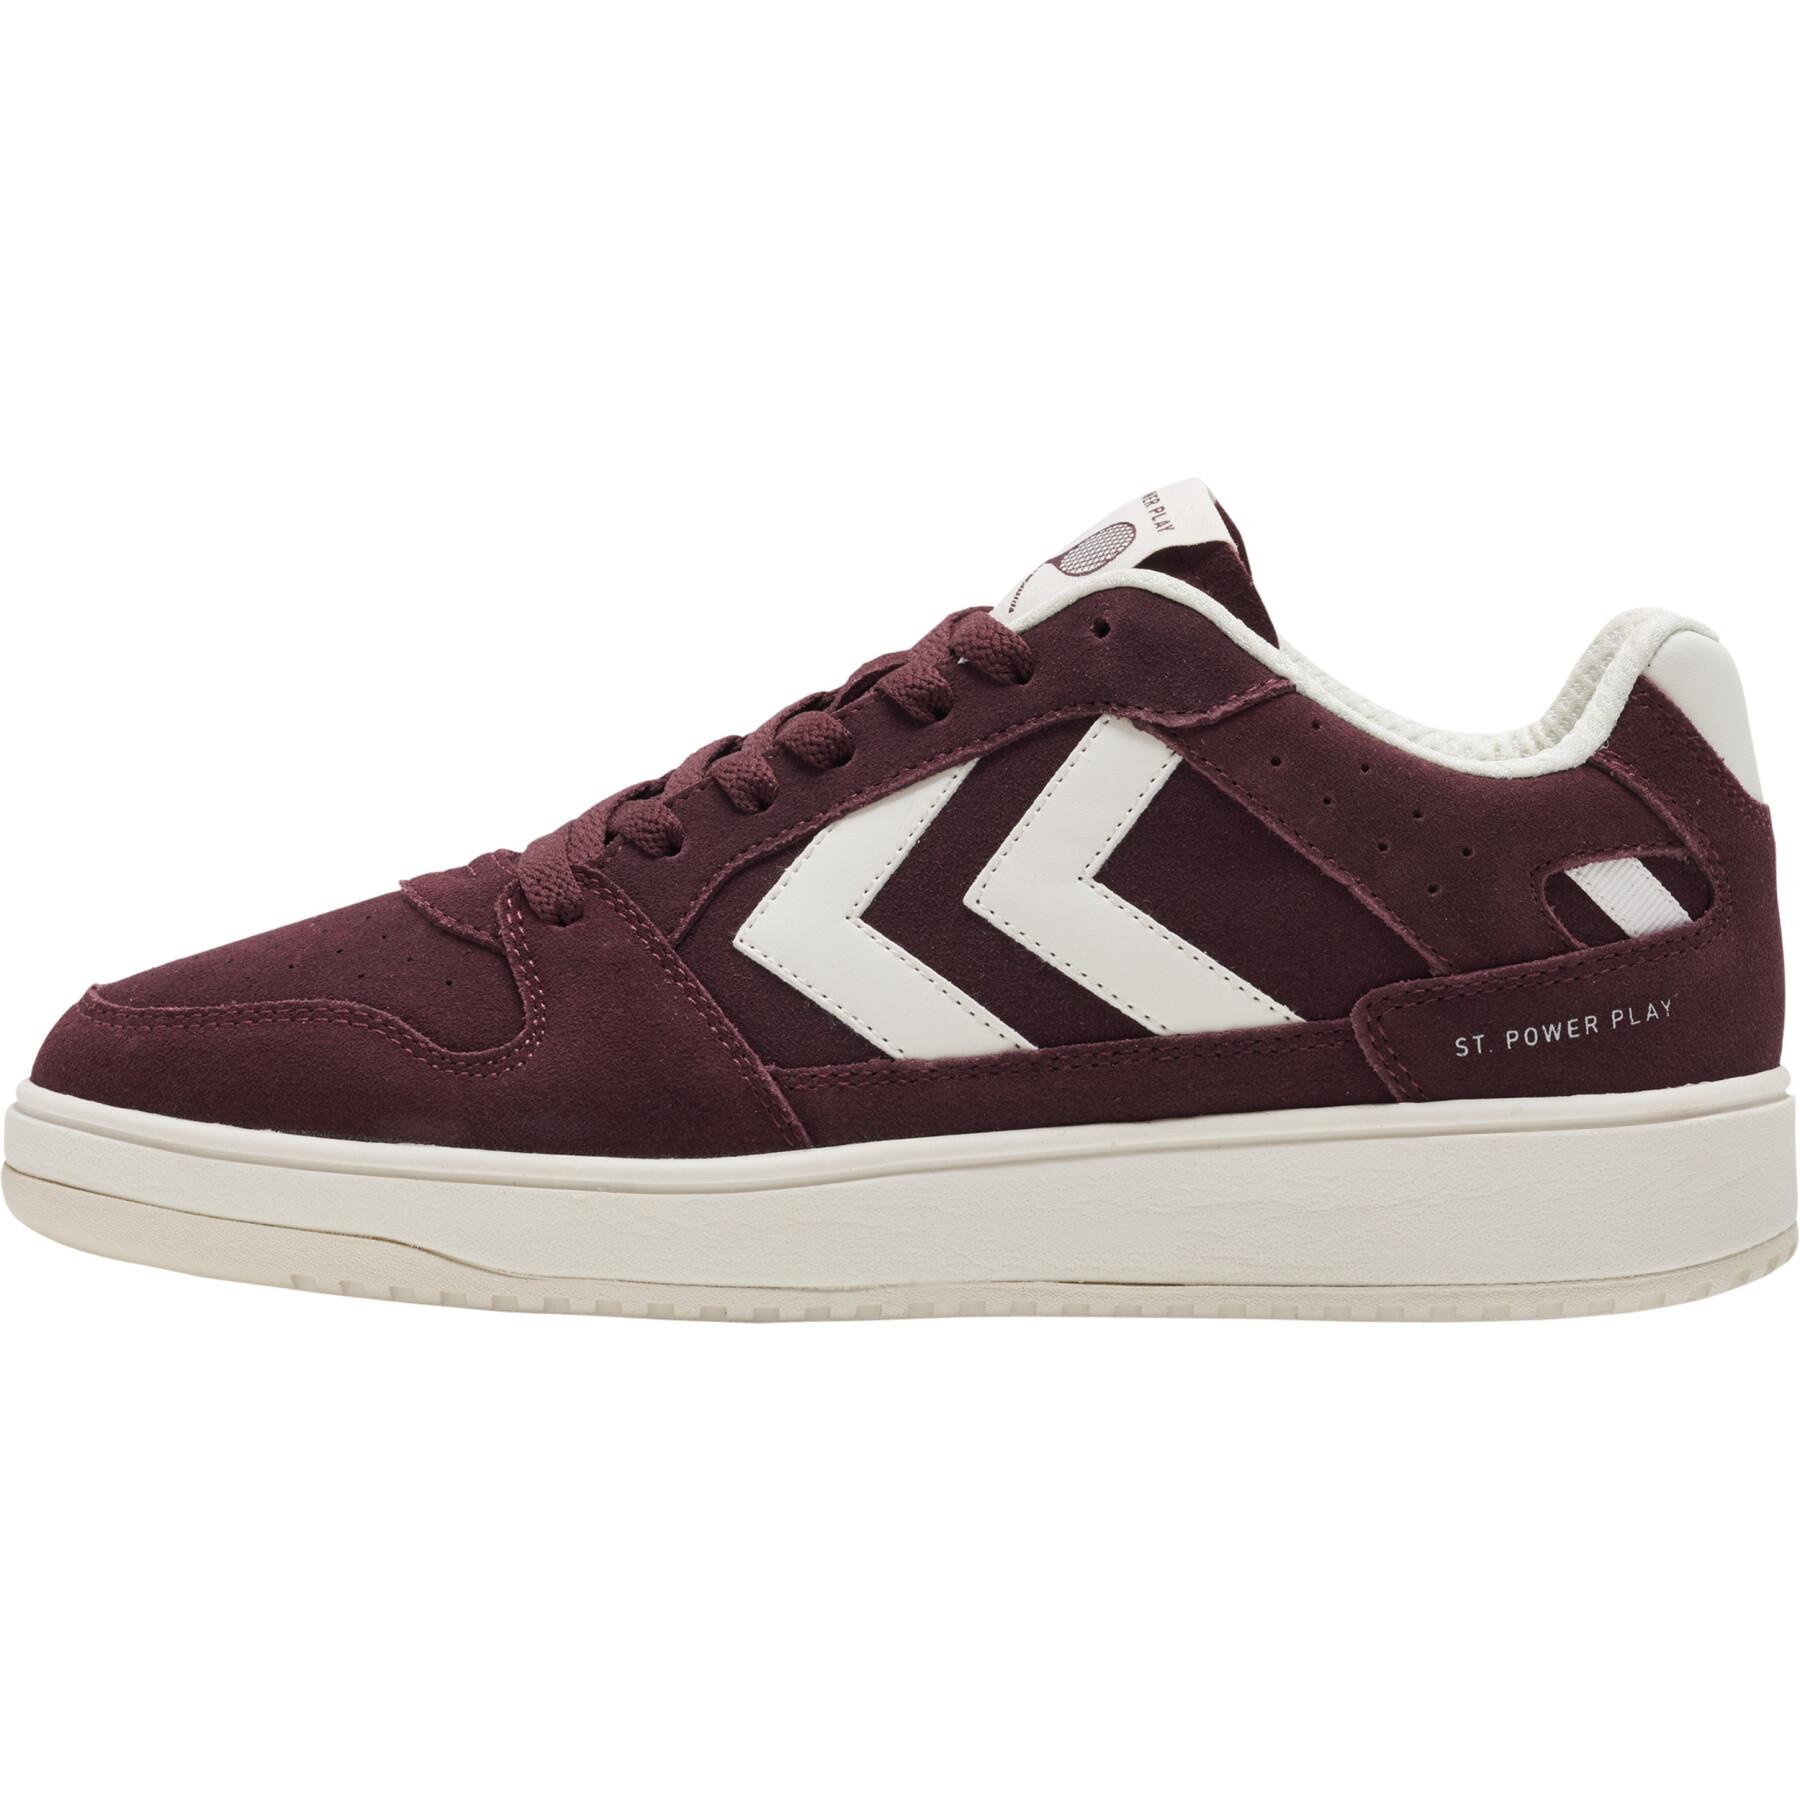 Sneakers Hummel St. Hummel Lifestyle Brands - Power - Suede Play 